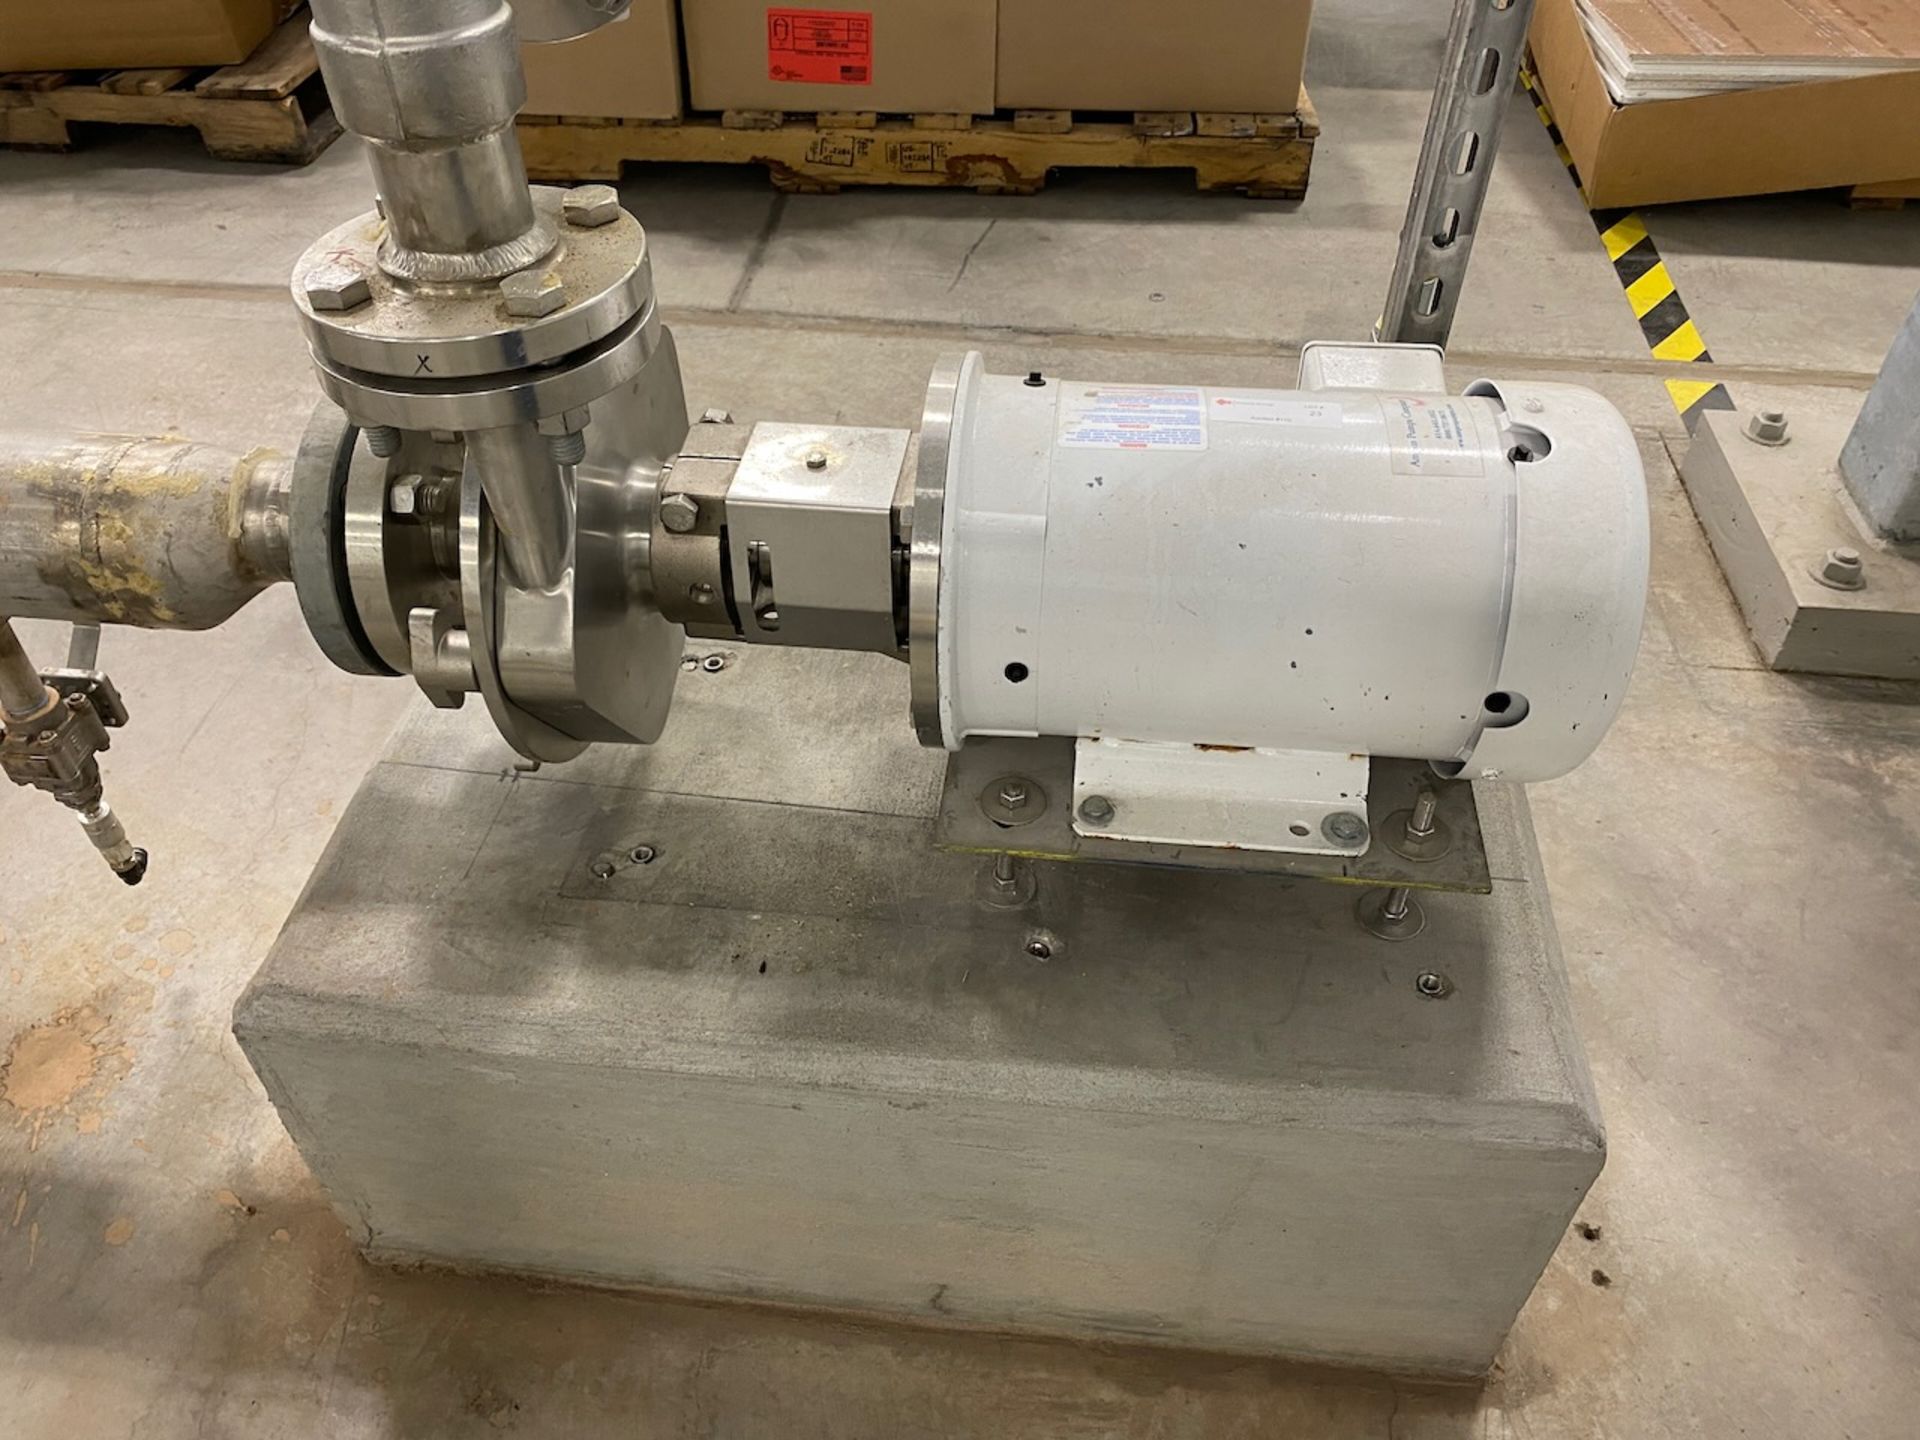 Ampco 3HP Centrifugal pump **See Auctioneers Note**